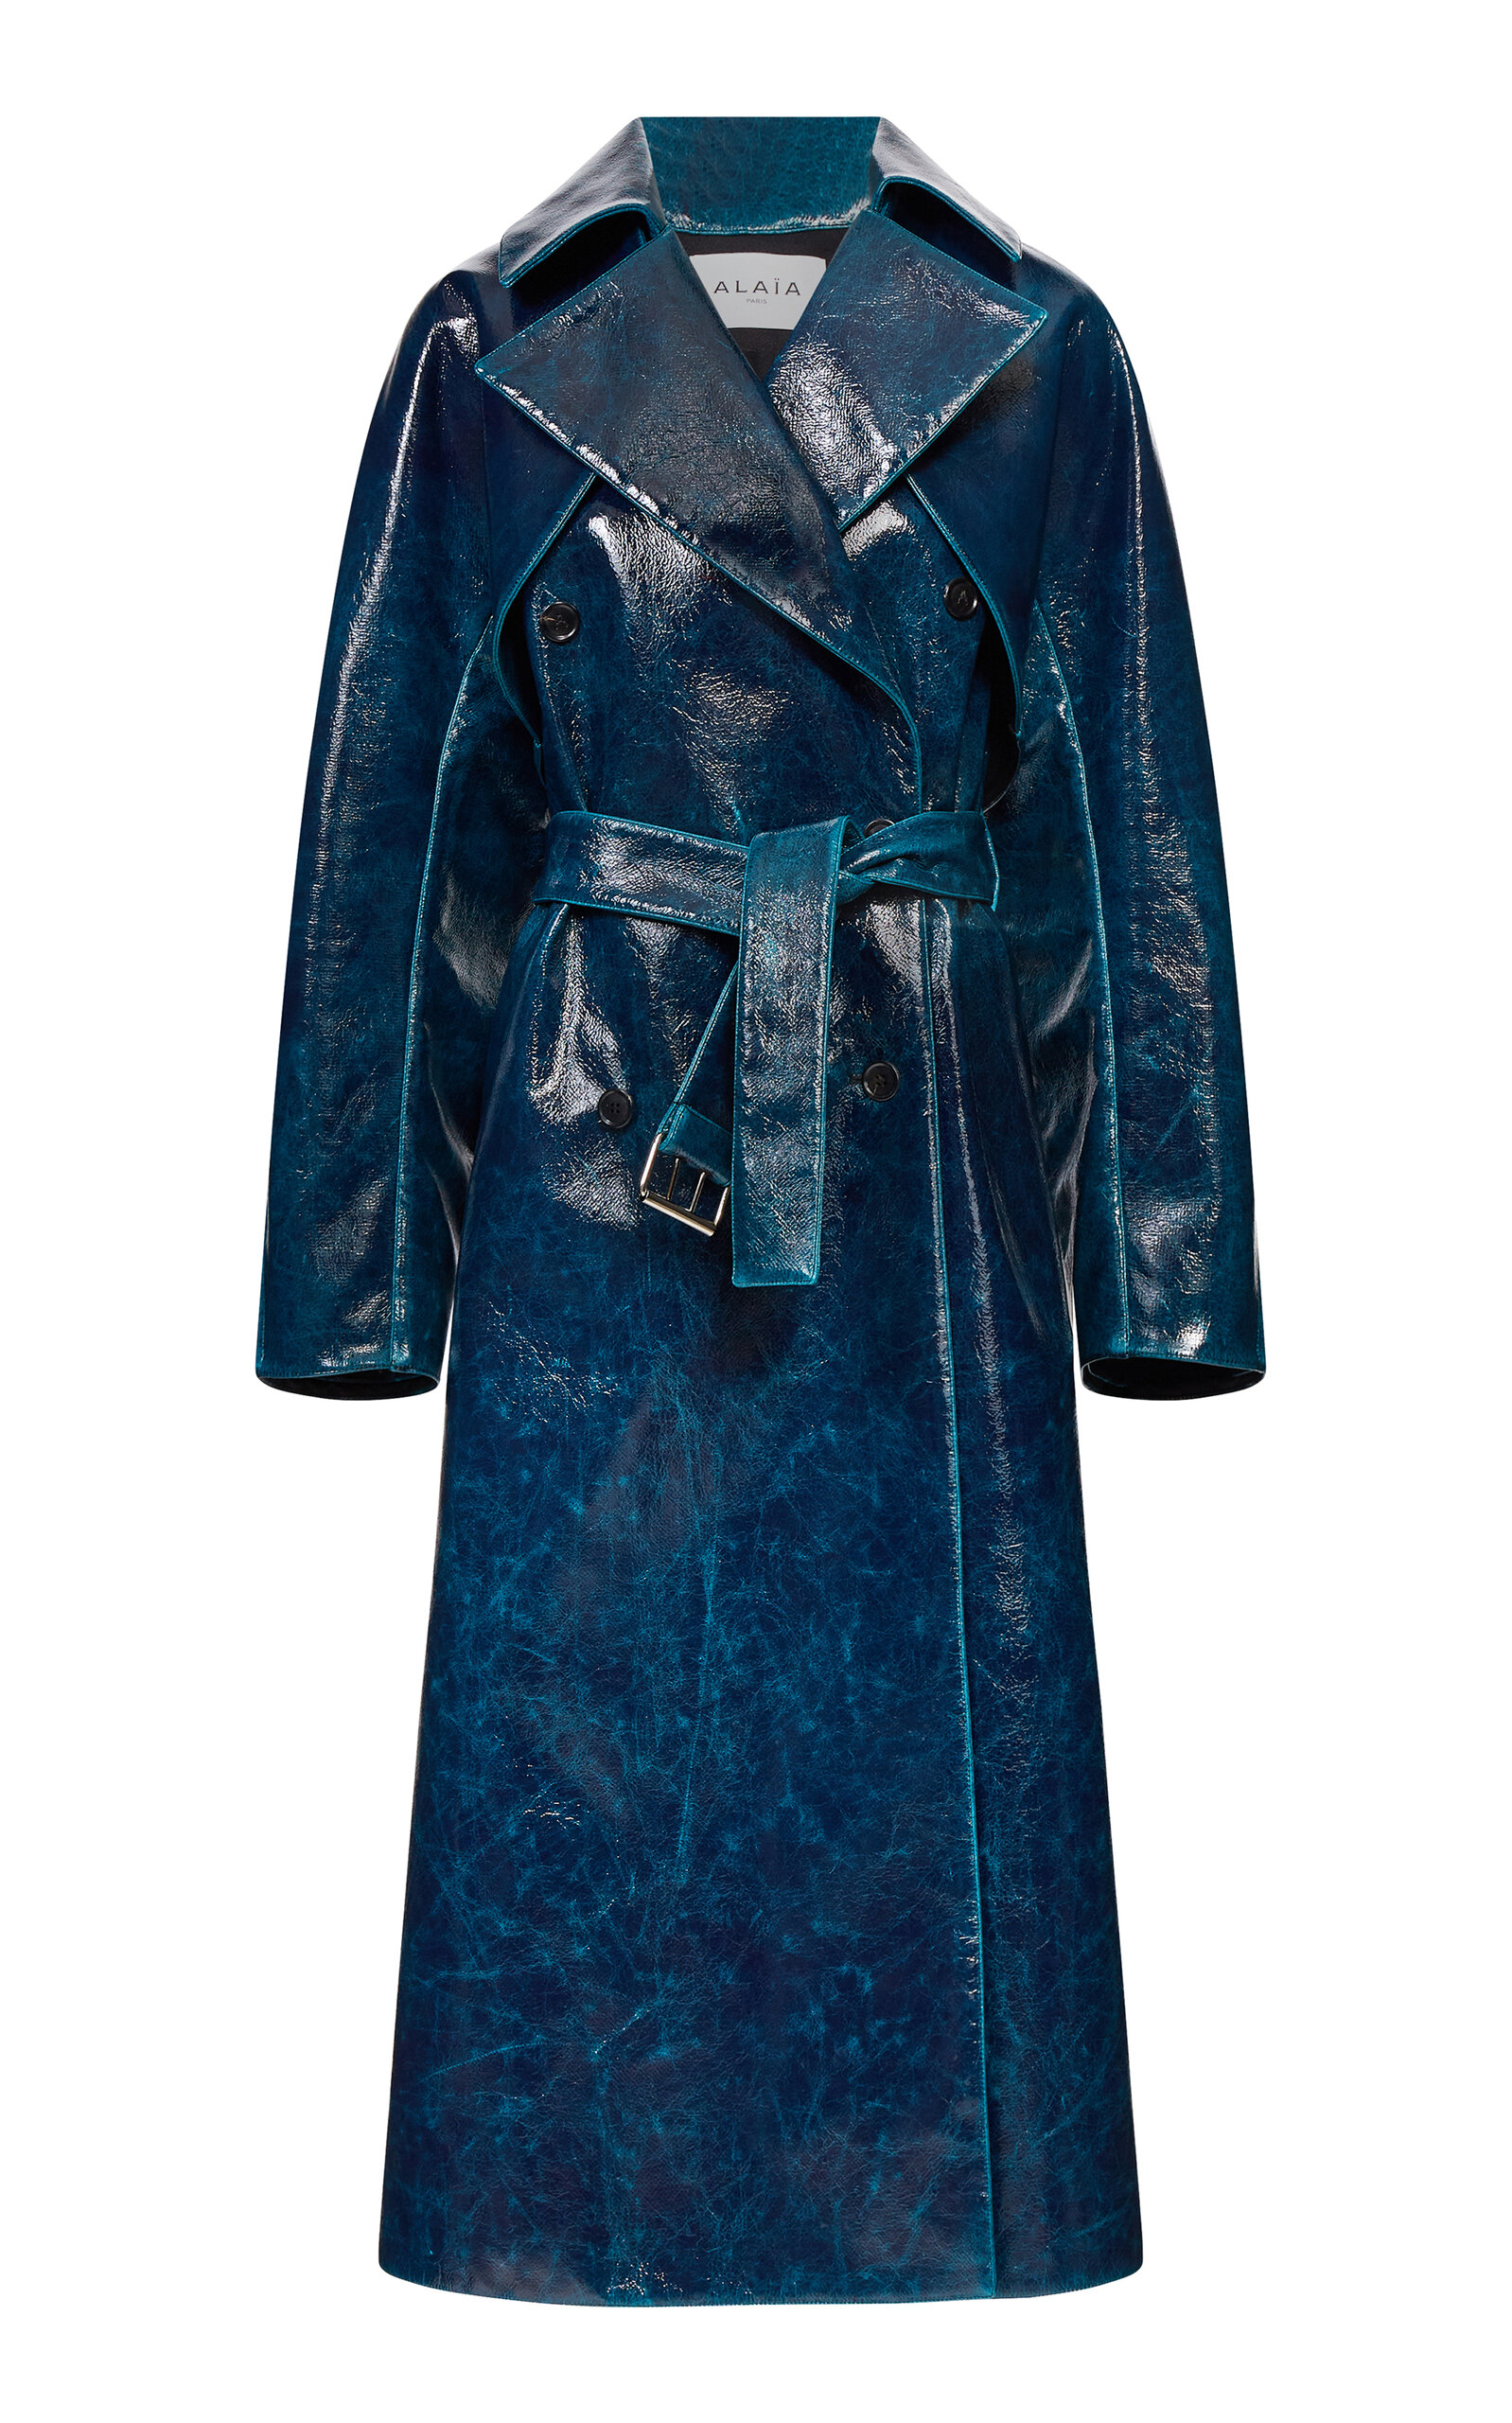 ALAÏA Lacquered Wool-Blend Trench Coat